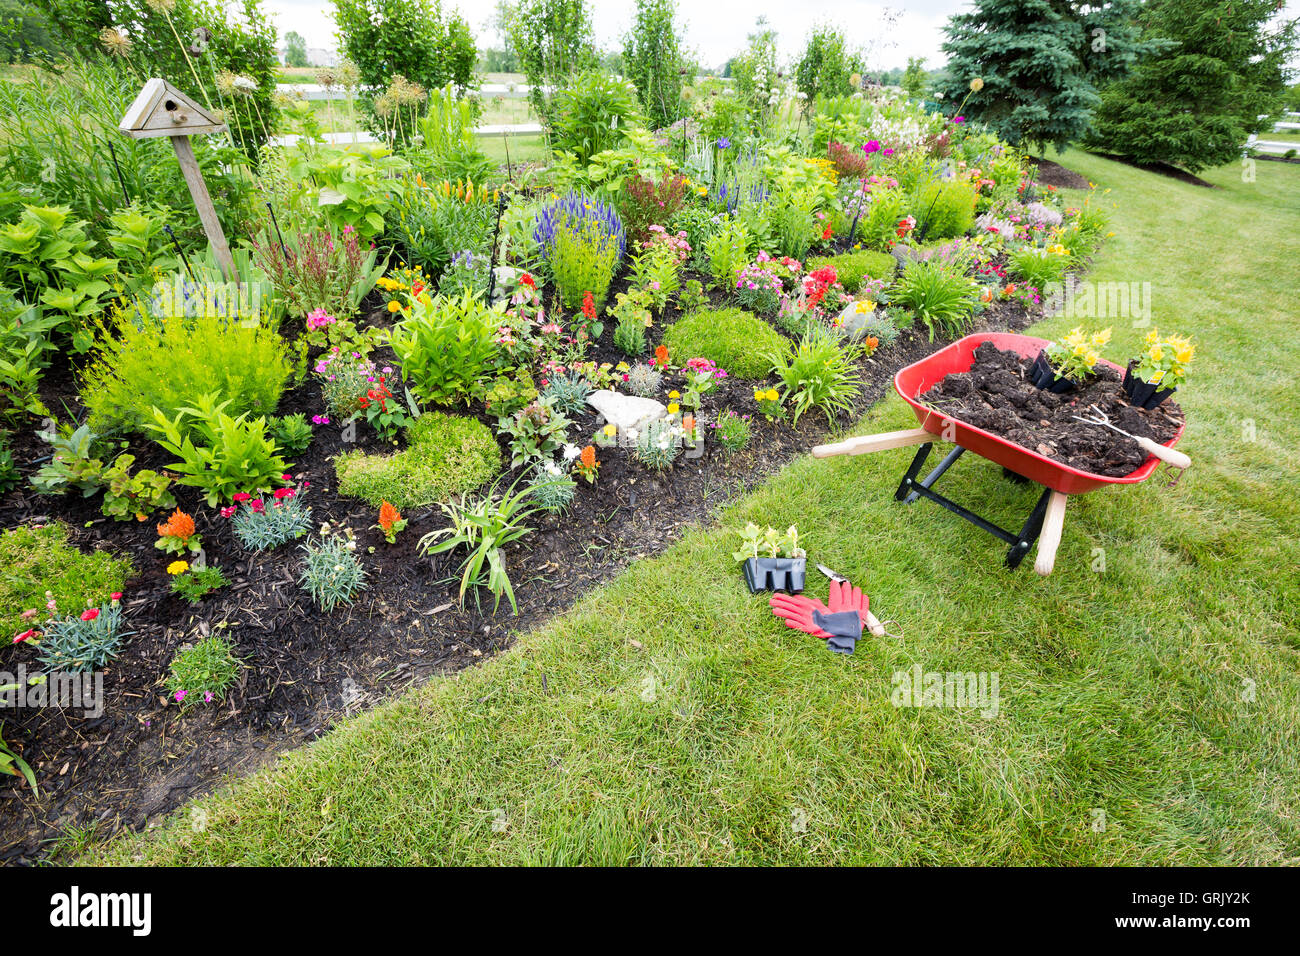 Garden tools laying on the ground near an arrangement of beautiful plants and flowers Stock Photo